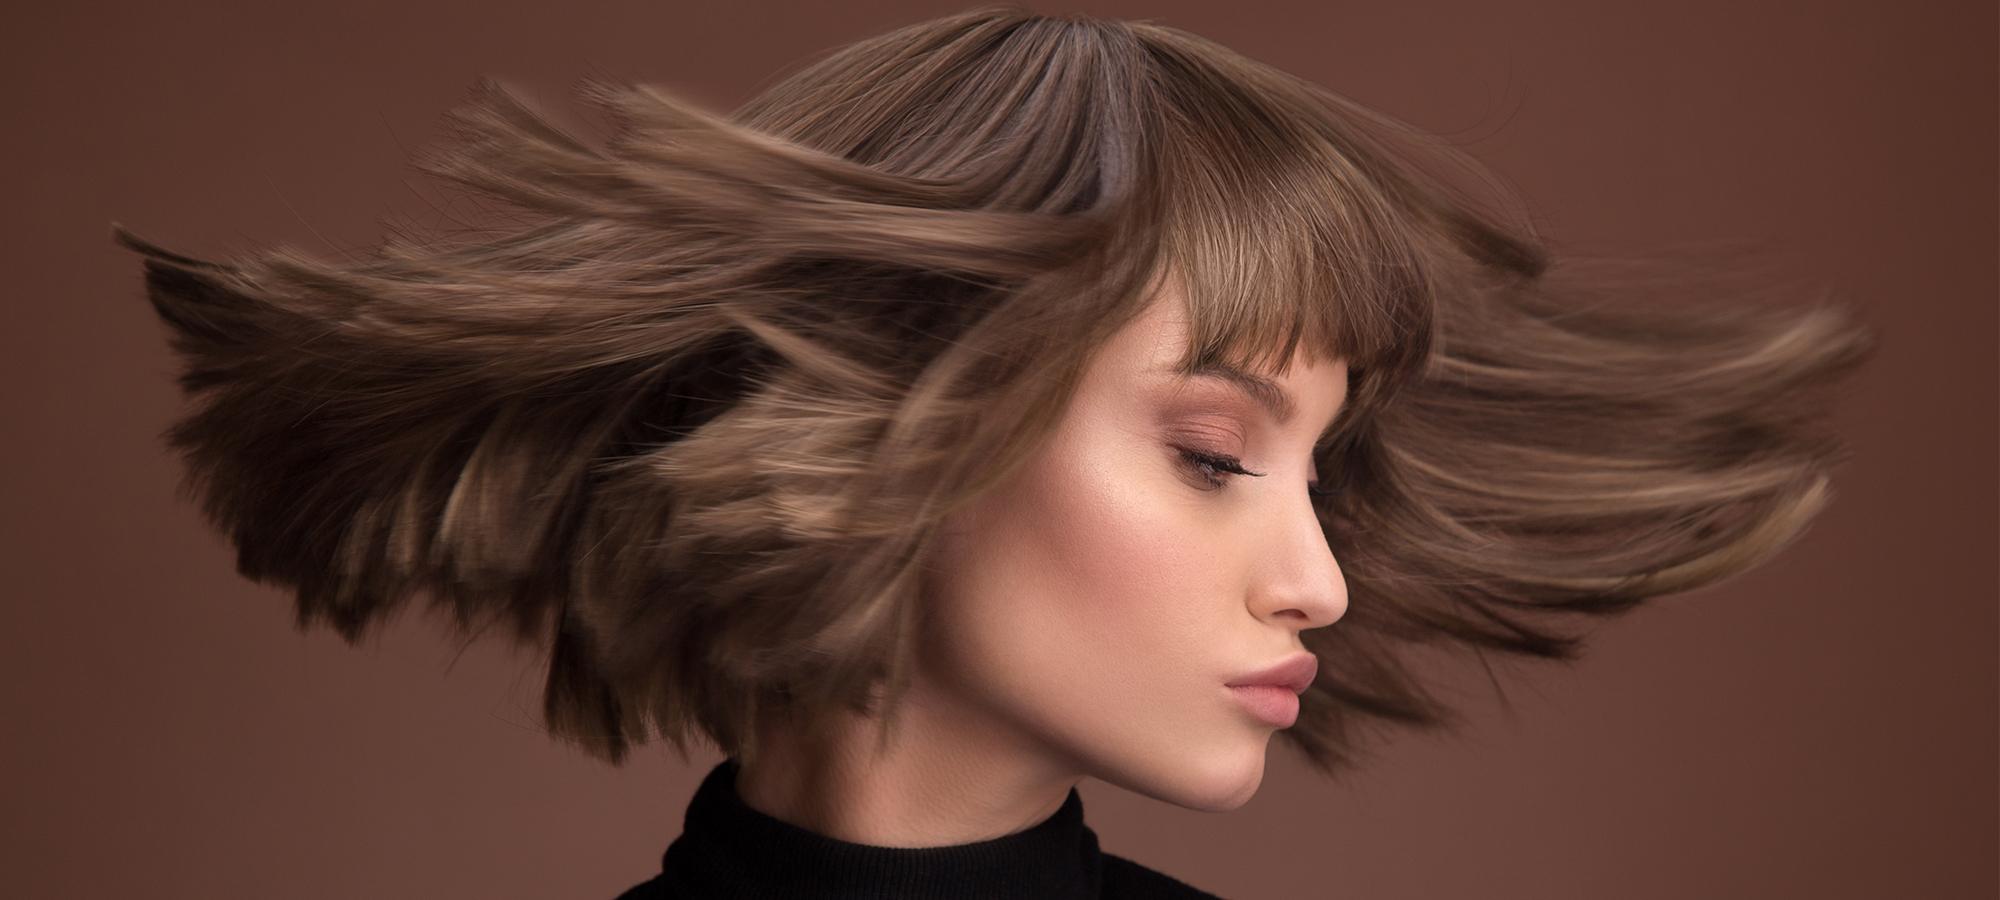 10 Best Apps for Hairstylists You Need To Check Out in 2023